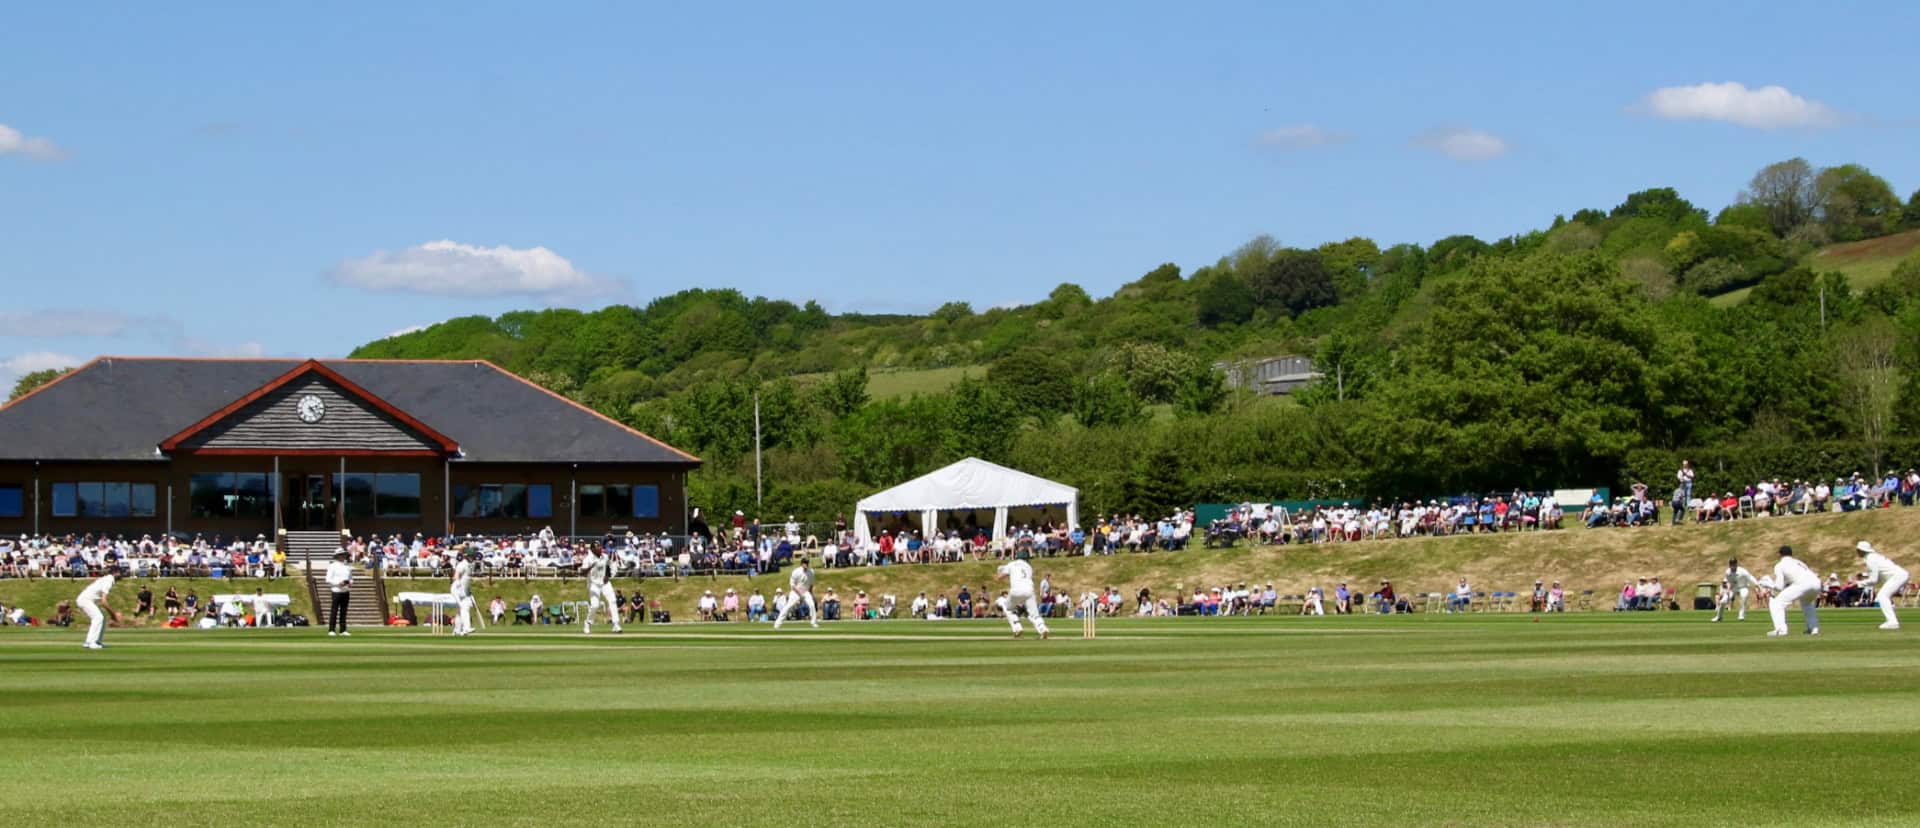 Hants team playing at Newclose Cricket Ground